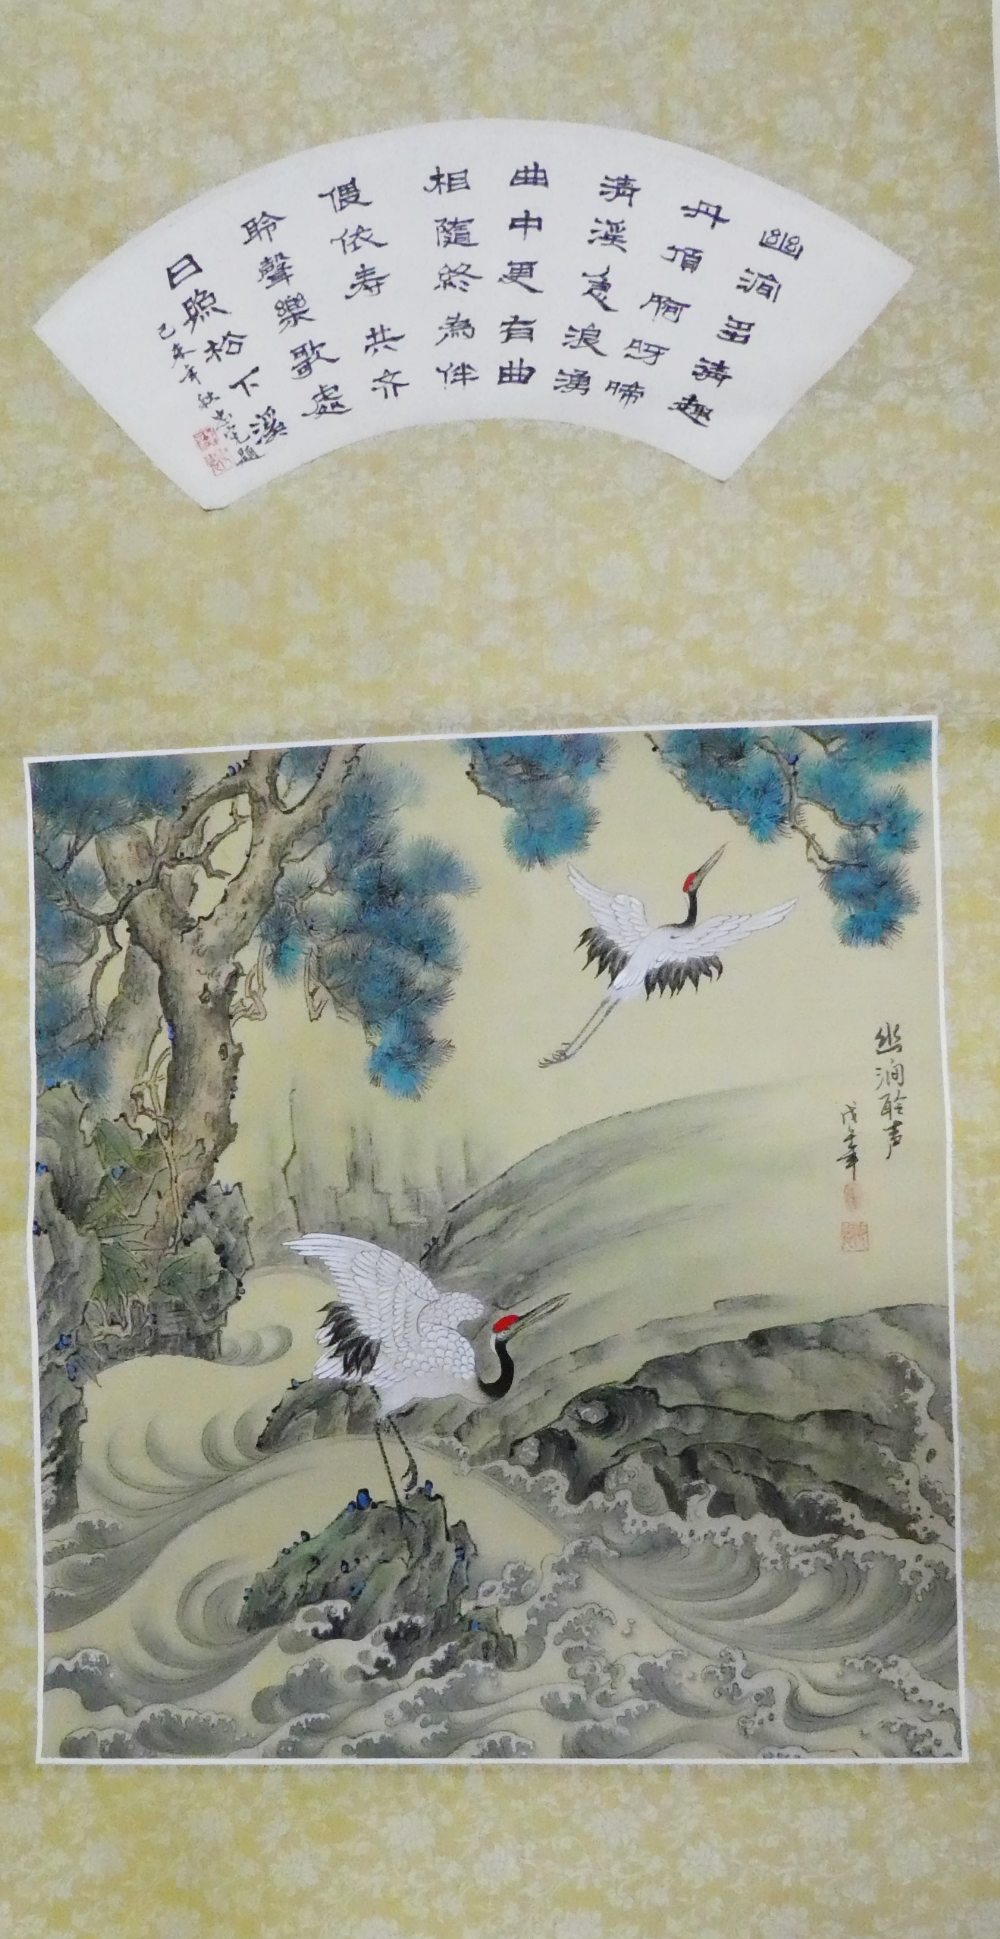 Chinese wall hanging scroll, painted with cranes and calligraphy